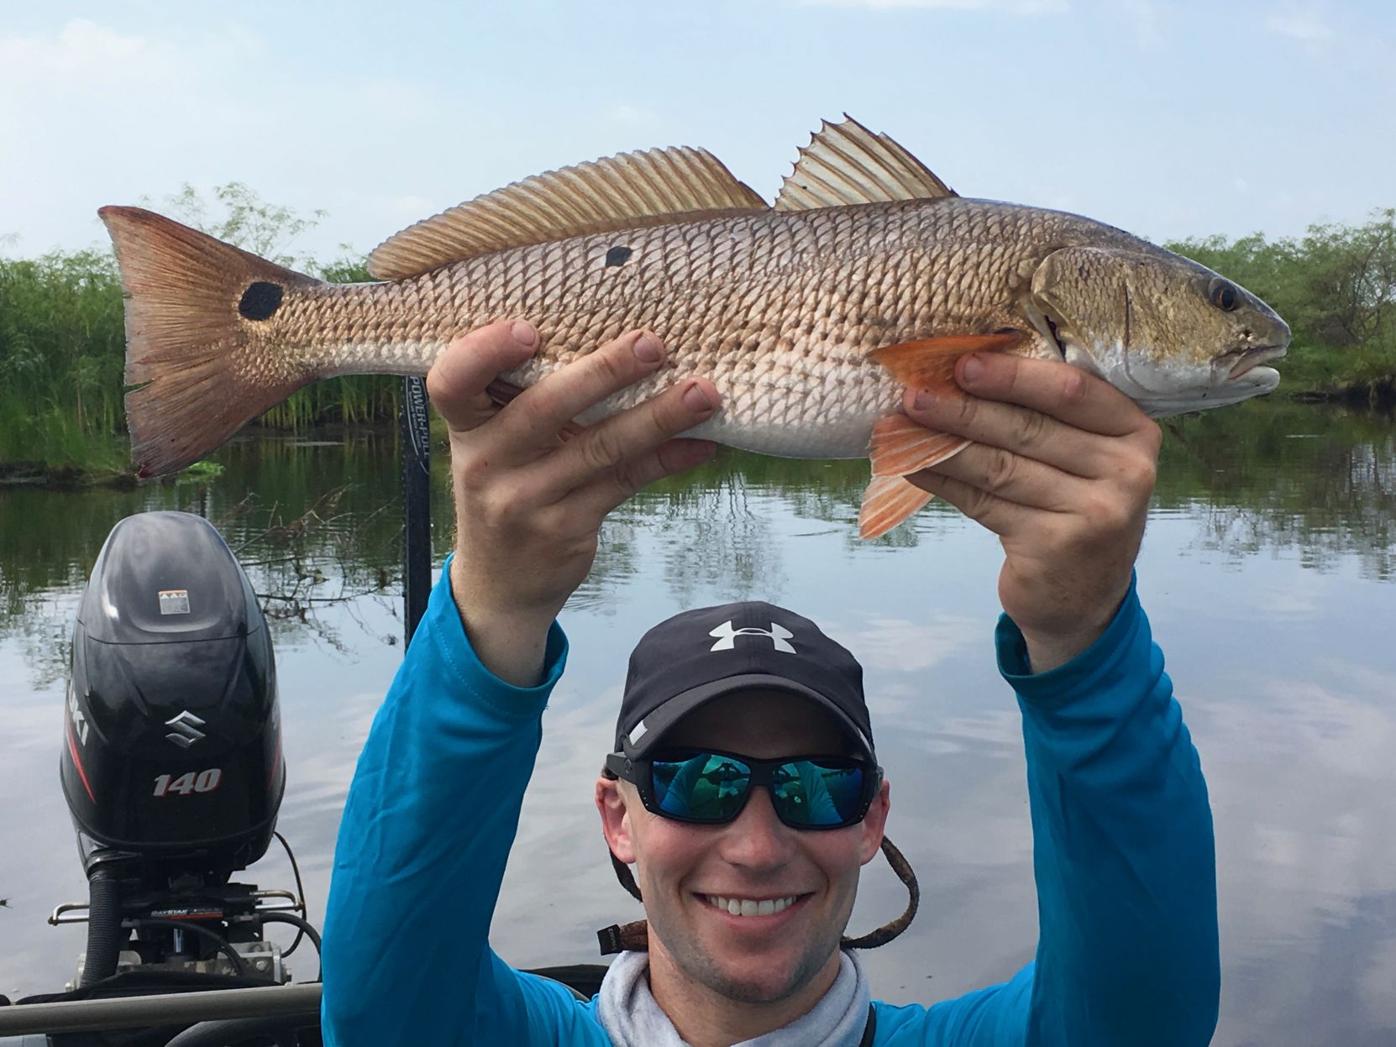 Anglers are pushing into skinny waters to target redfish they can see, Louisiana Outdoors